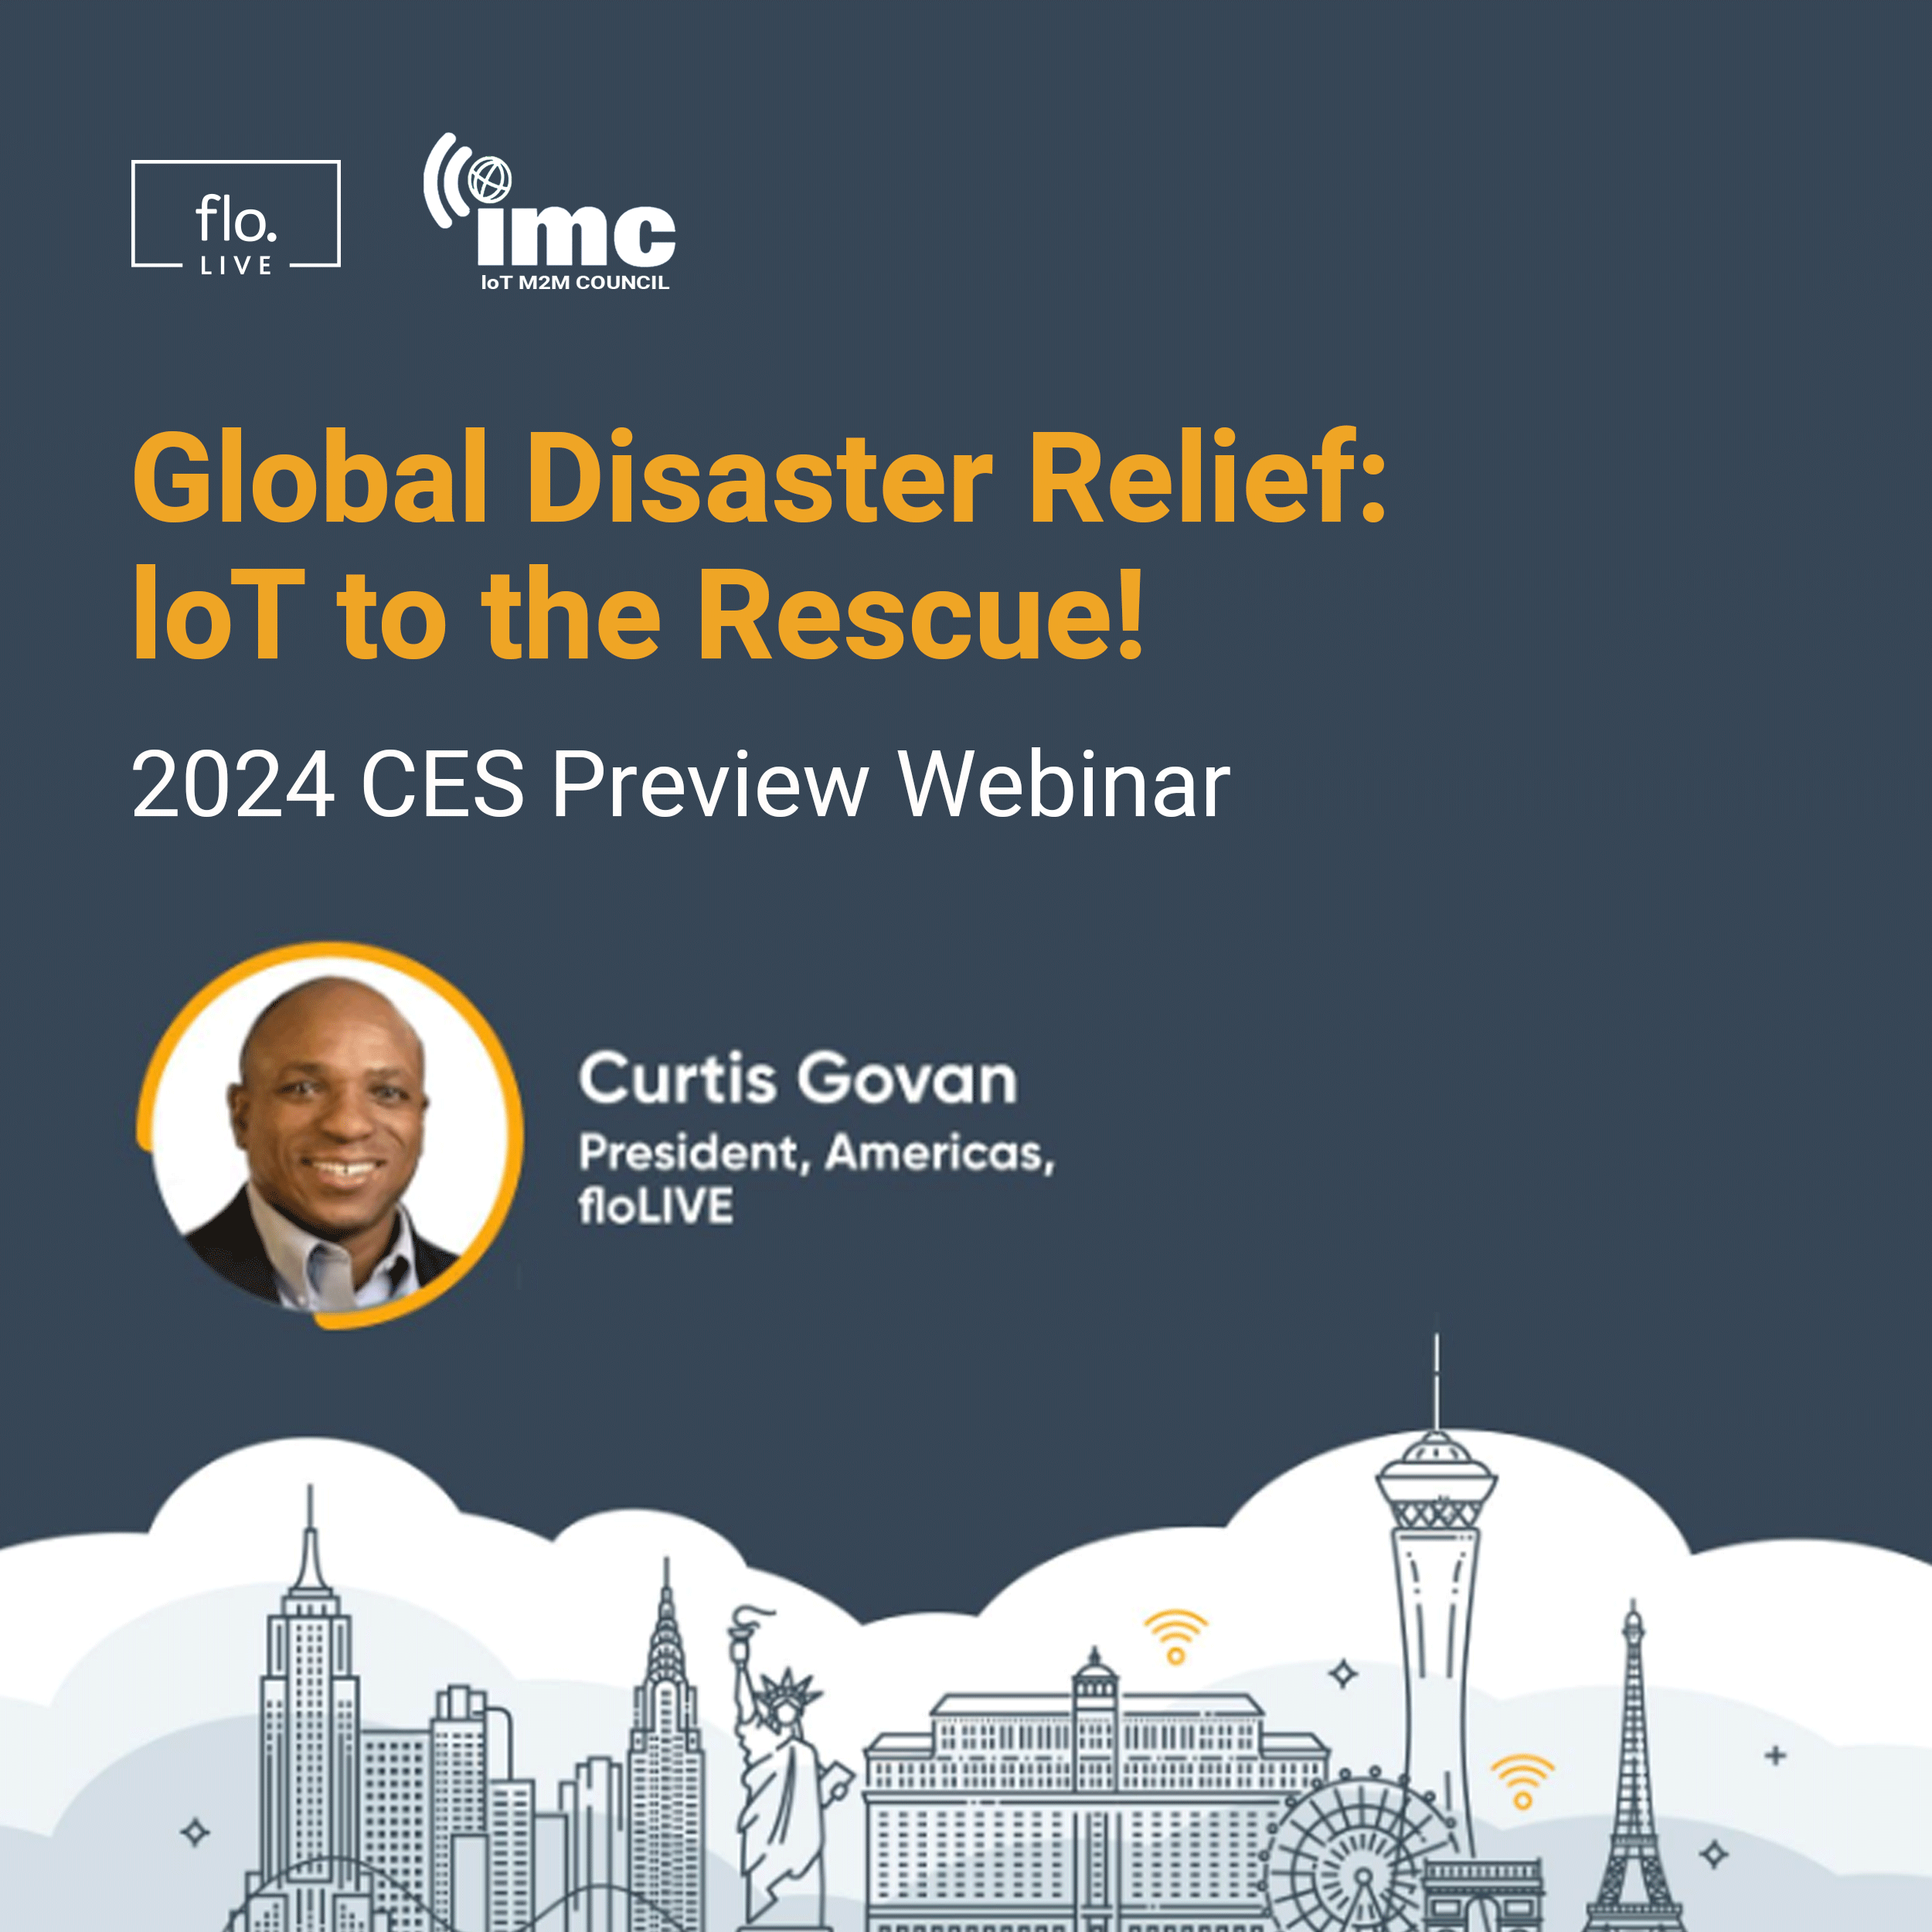 Global Disaster Relief: IoT to the Rescue